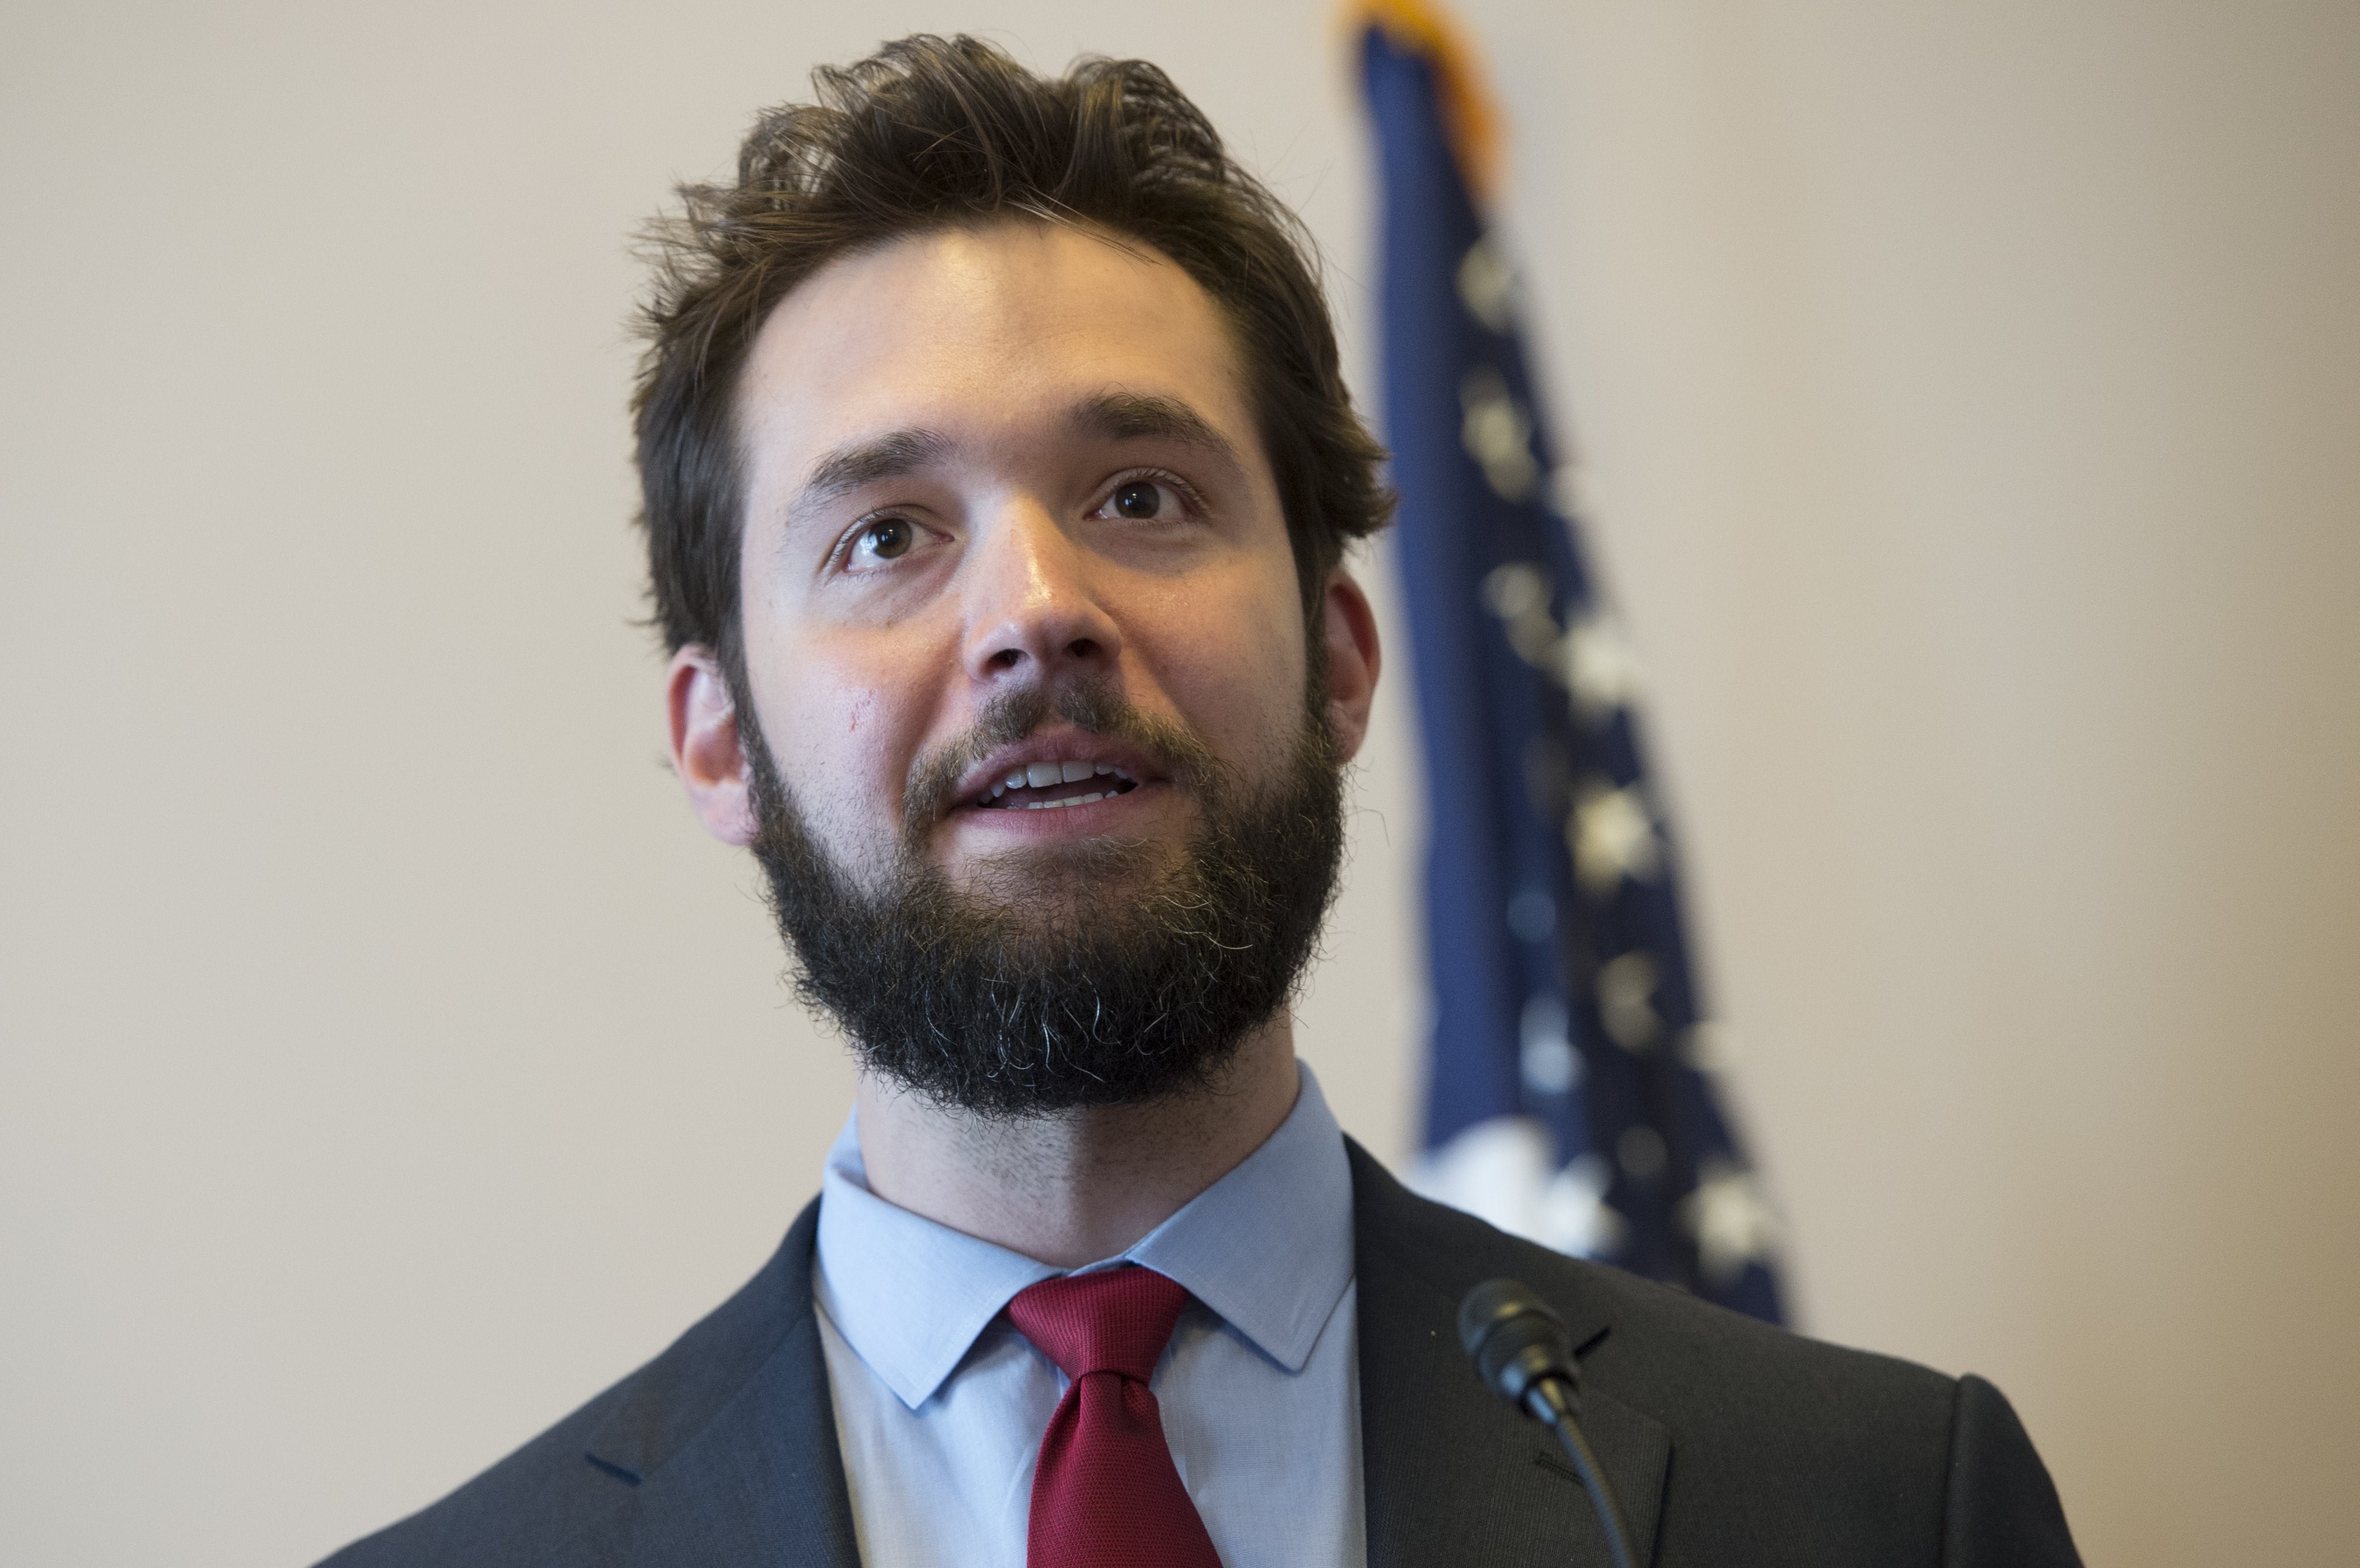 Alexis Ohanian, investor and founder of Reddit, speaks about net neutrality for the Internet during a discussion hosted by the Free Press Action Fund on Capitol Hill in Washington on July 8, 2014. (Saul Loeb&amp;mdash;AFP/Getty Images)